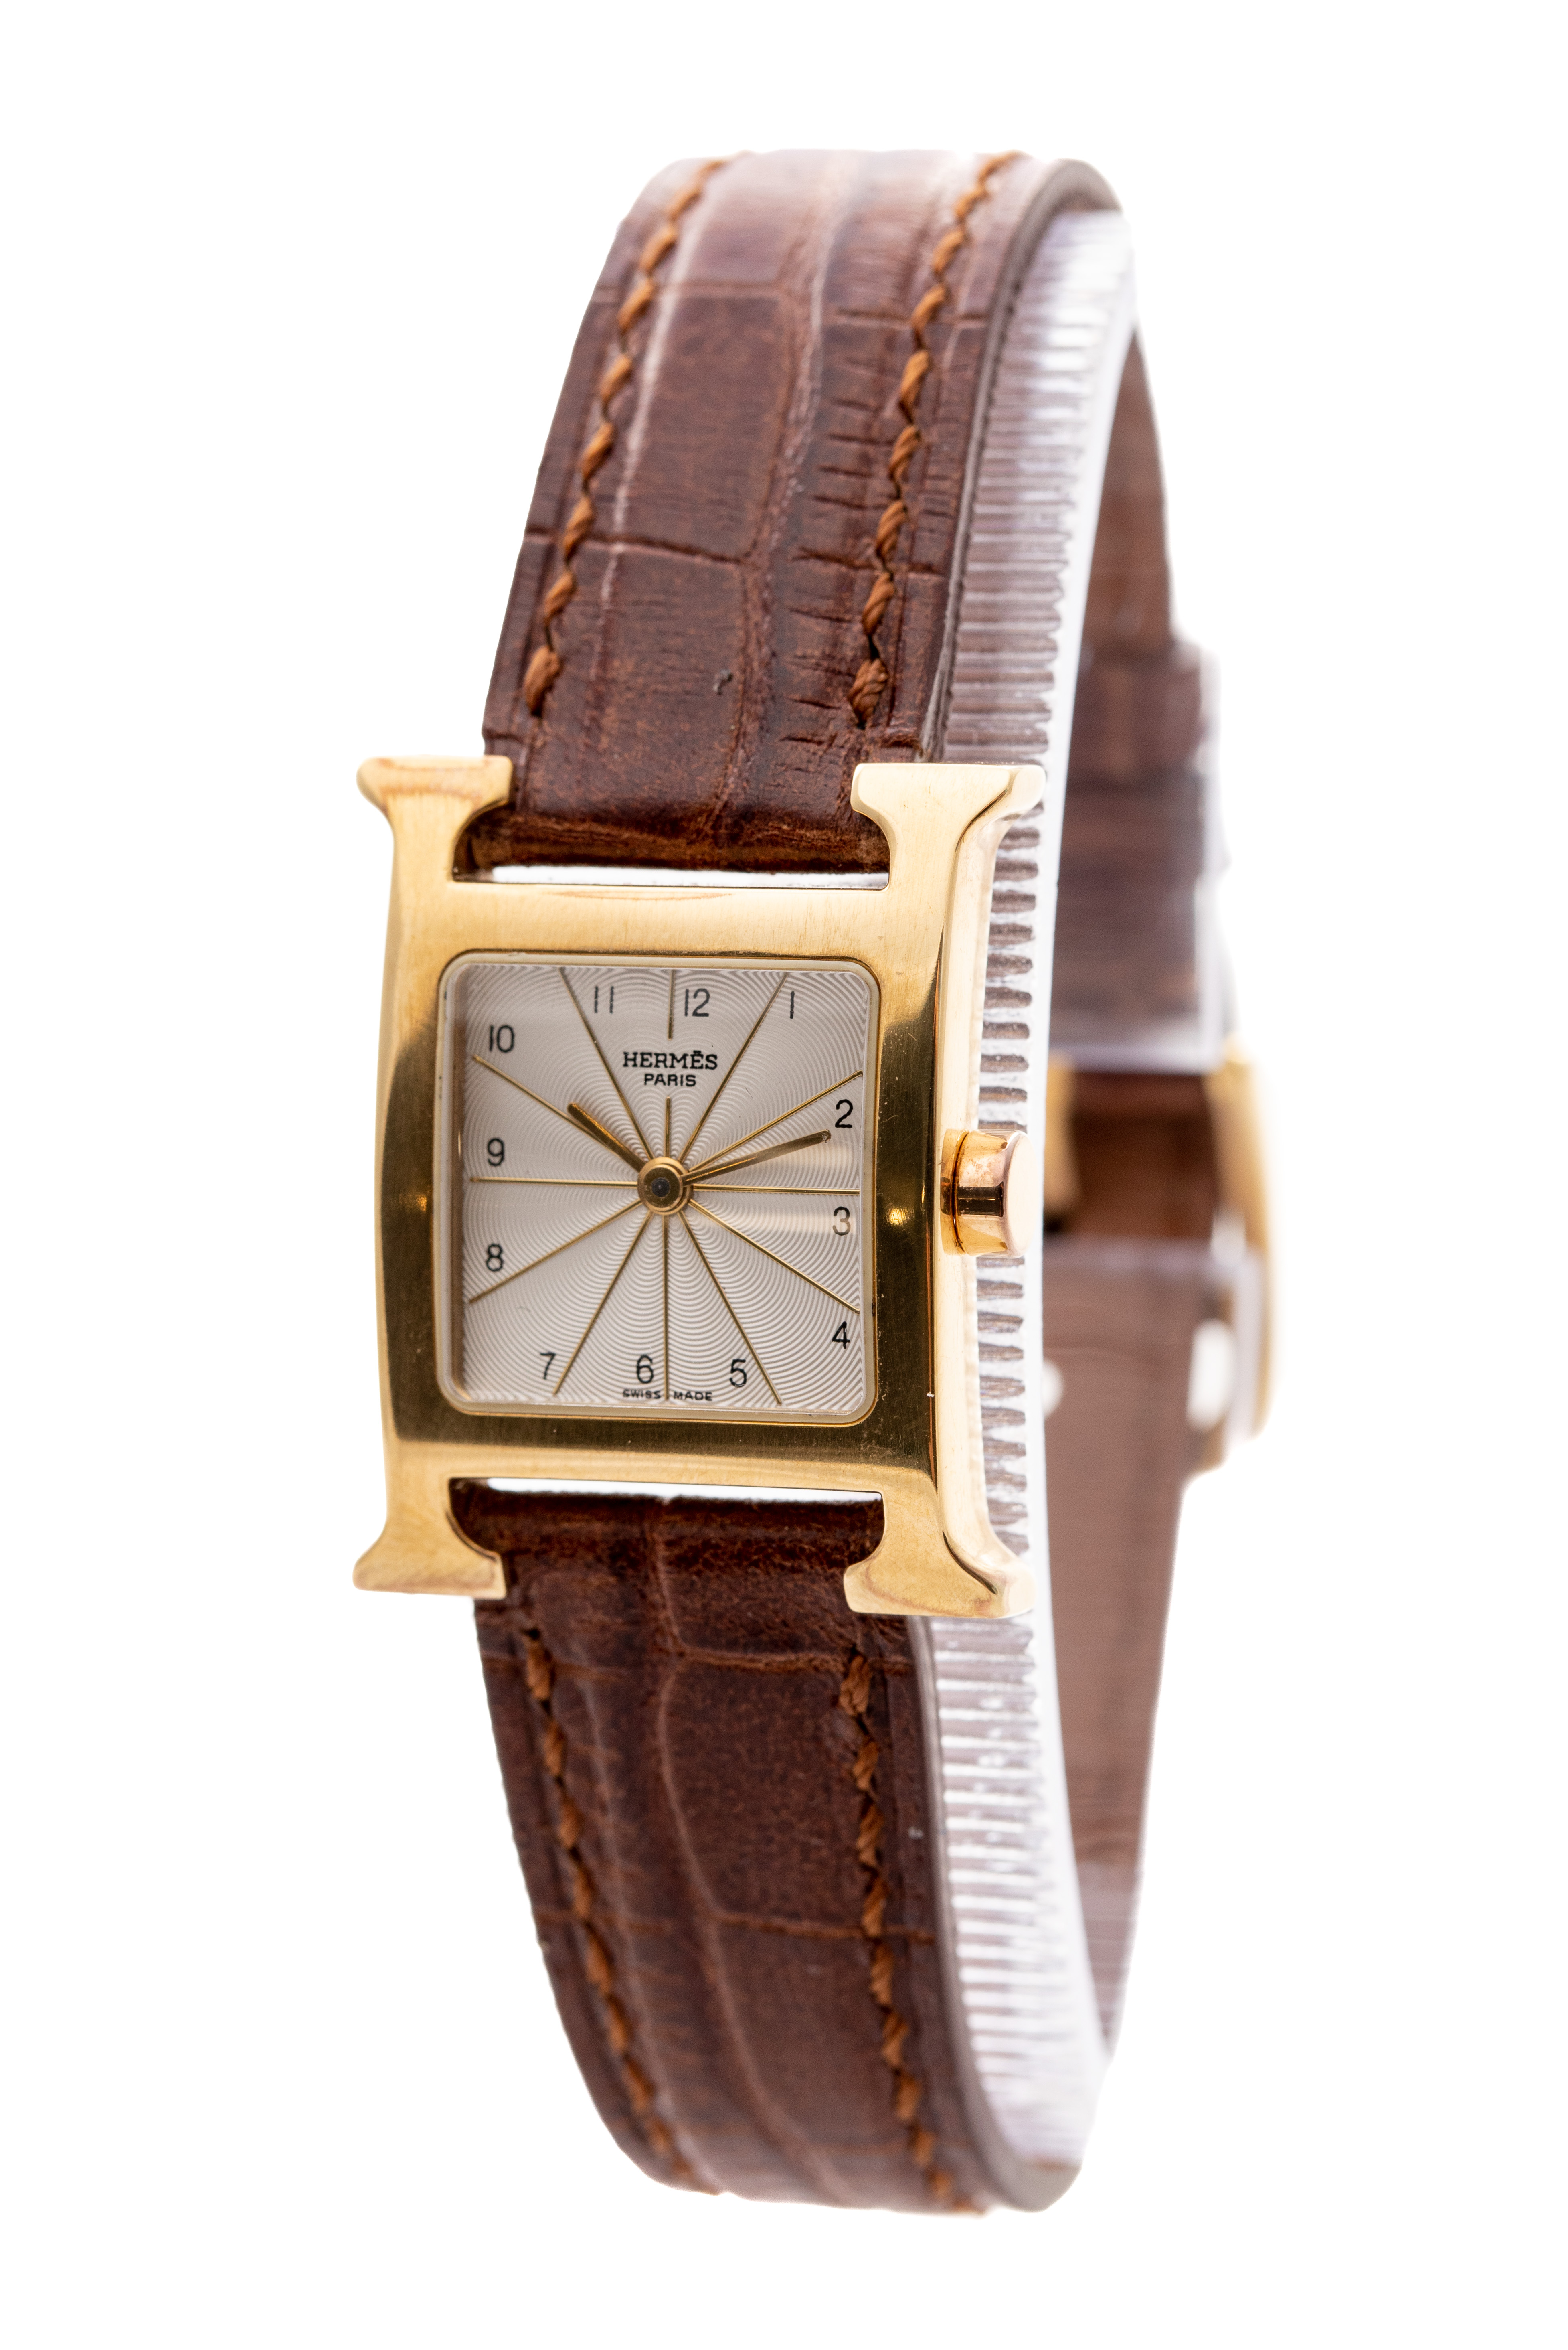 HERMES GOLD PLATED 21MM QUARTZ WATCH SILVER DIAL REF: HH1.201 